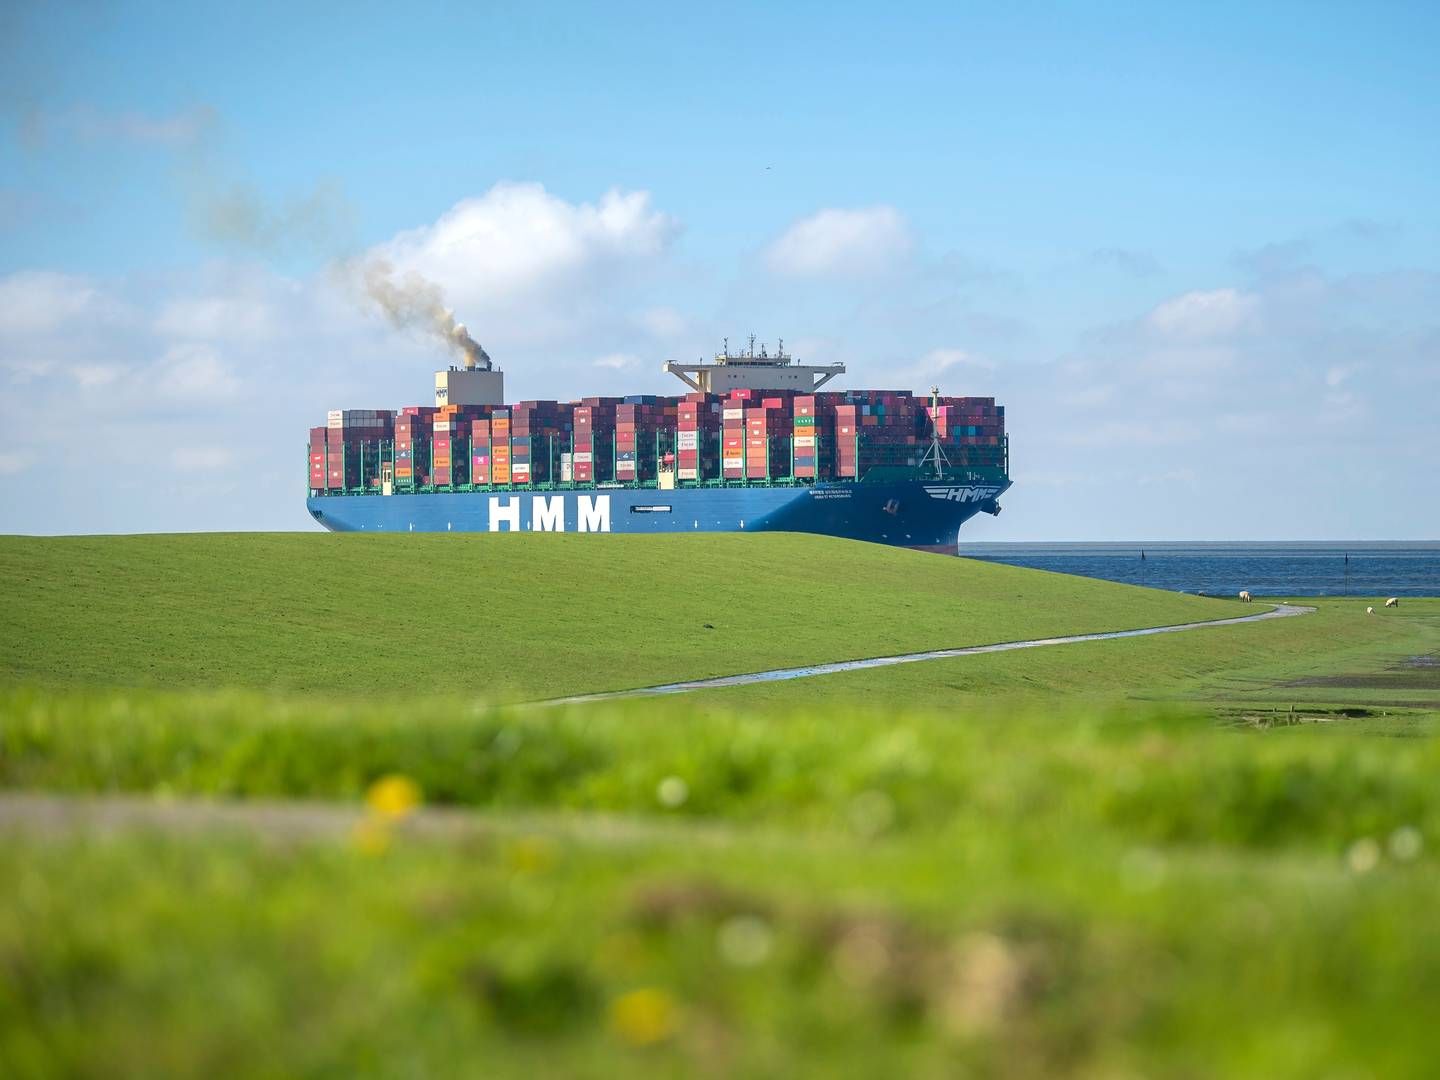 South Korean container line HMM is eighth-largest in the world measured on capacity. According to Alphaliner, the carrier manages 76 ships with total capacity of approx. 818,000 teu. | Photo: Sina Schuldt/AP/Ritzau Scanpix